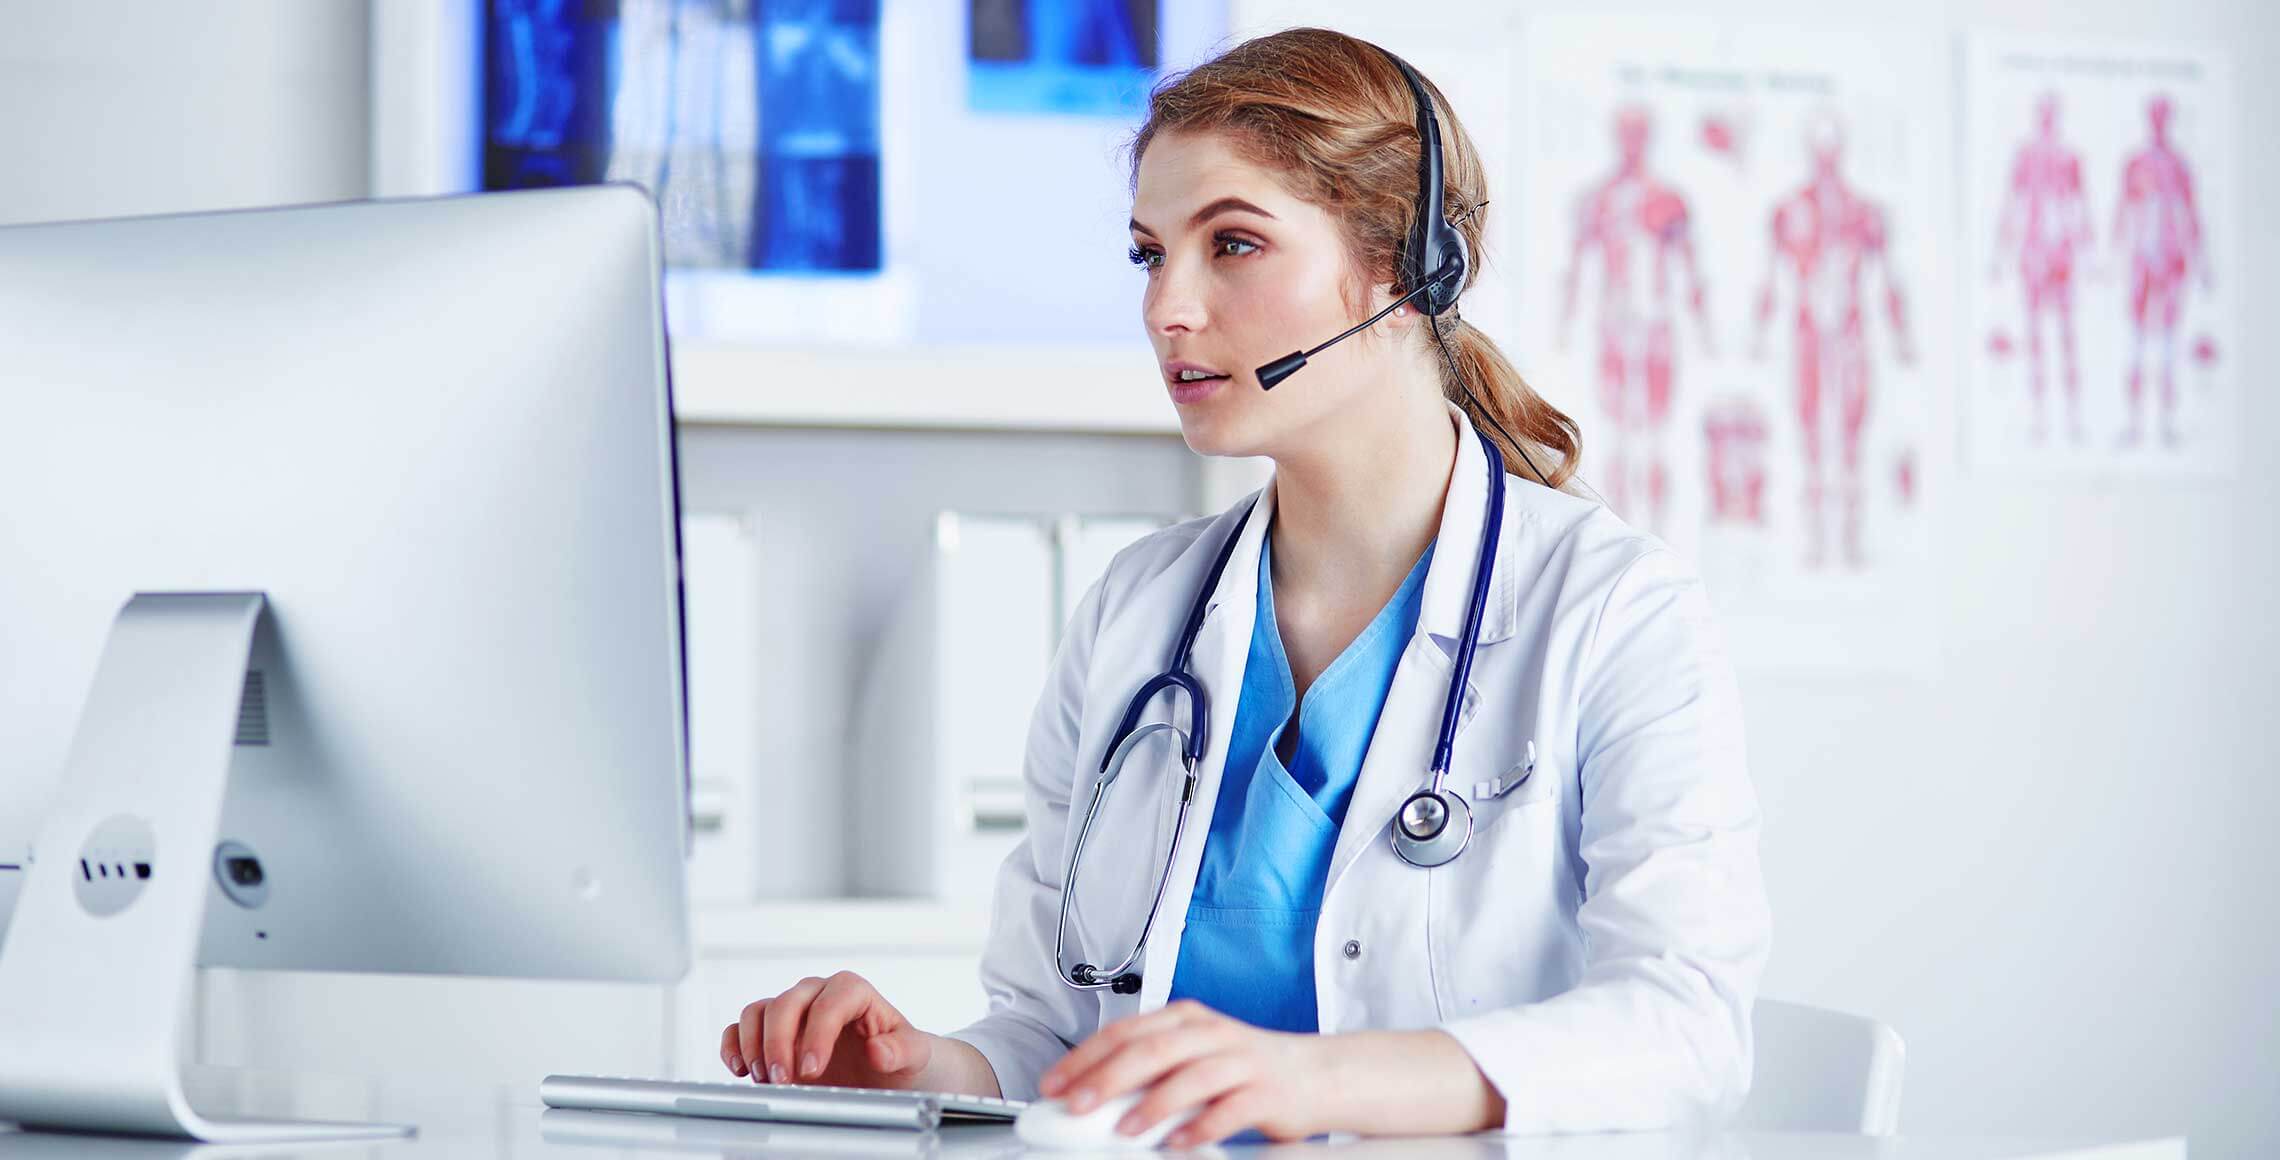 9 considerations for outsourcing your healthcare call center | Talkdesk